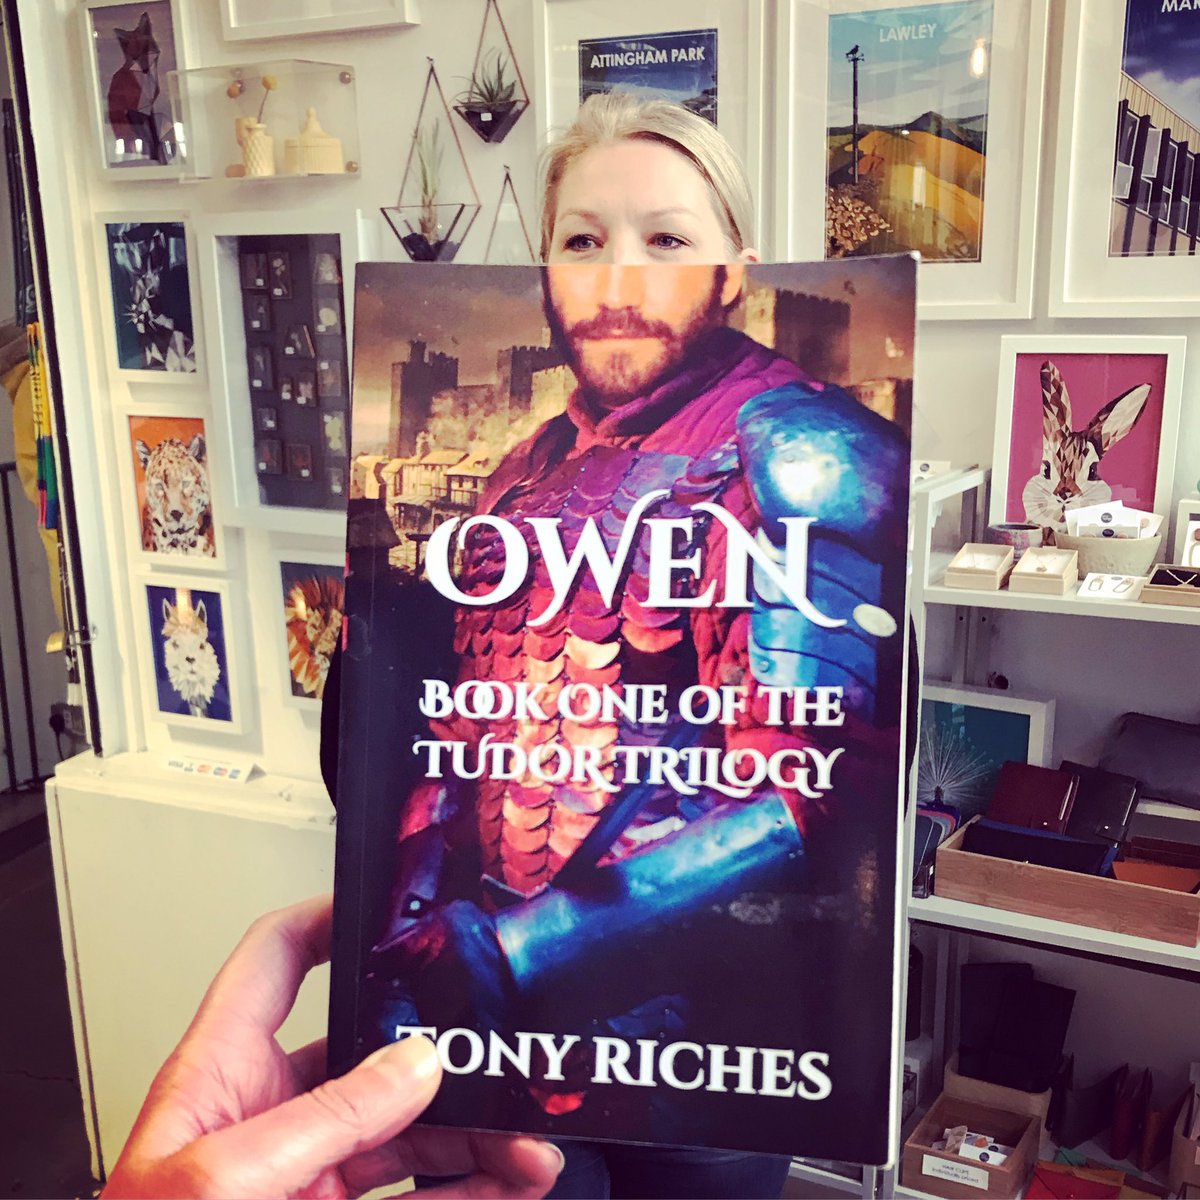 Clanking about as ‘Owen’ today for #bookfacefriday Thank you @romydesign for transforming me and thanks to #tonyriches for a fab cover to borrow. #book #bookshopping #shrewsbury #shropshire #fiction #reading #loveyourmarket #bookworm #shelfie #booklife #library #libraries